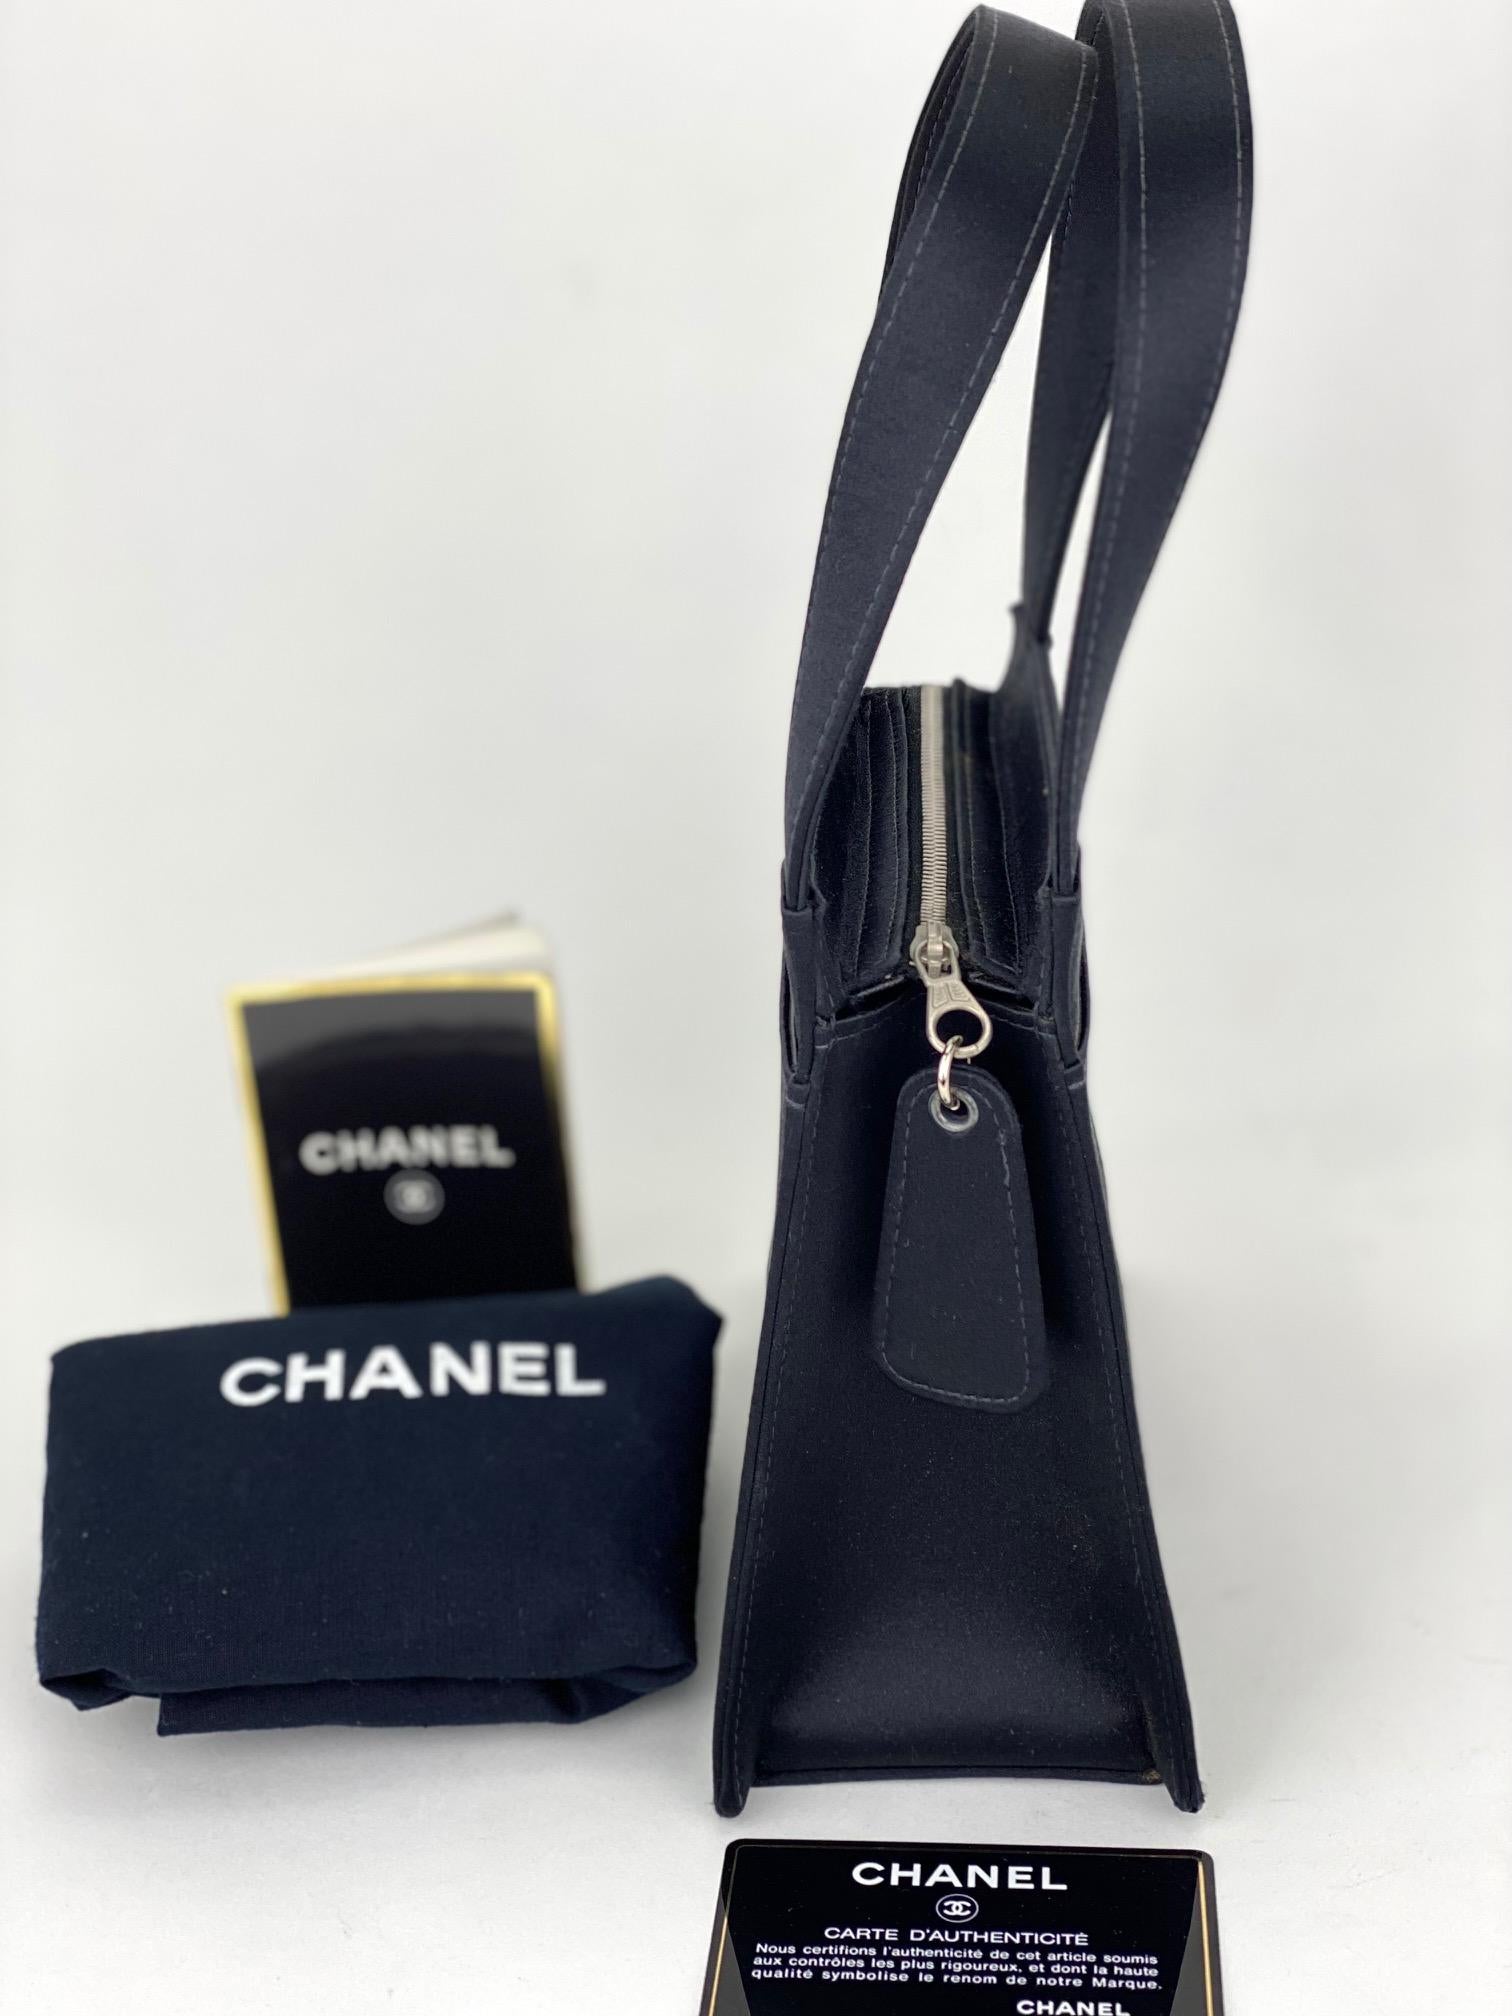 Pre-Owned  100% Authentic
Chanel Satin Vintage Black Handbag
This mini size tote can hold a max cell
phone and other essentials. It just makes
the perfect evening bag with its Satin Material
RATING: B    very good, well maintained,
shows minor signs